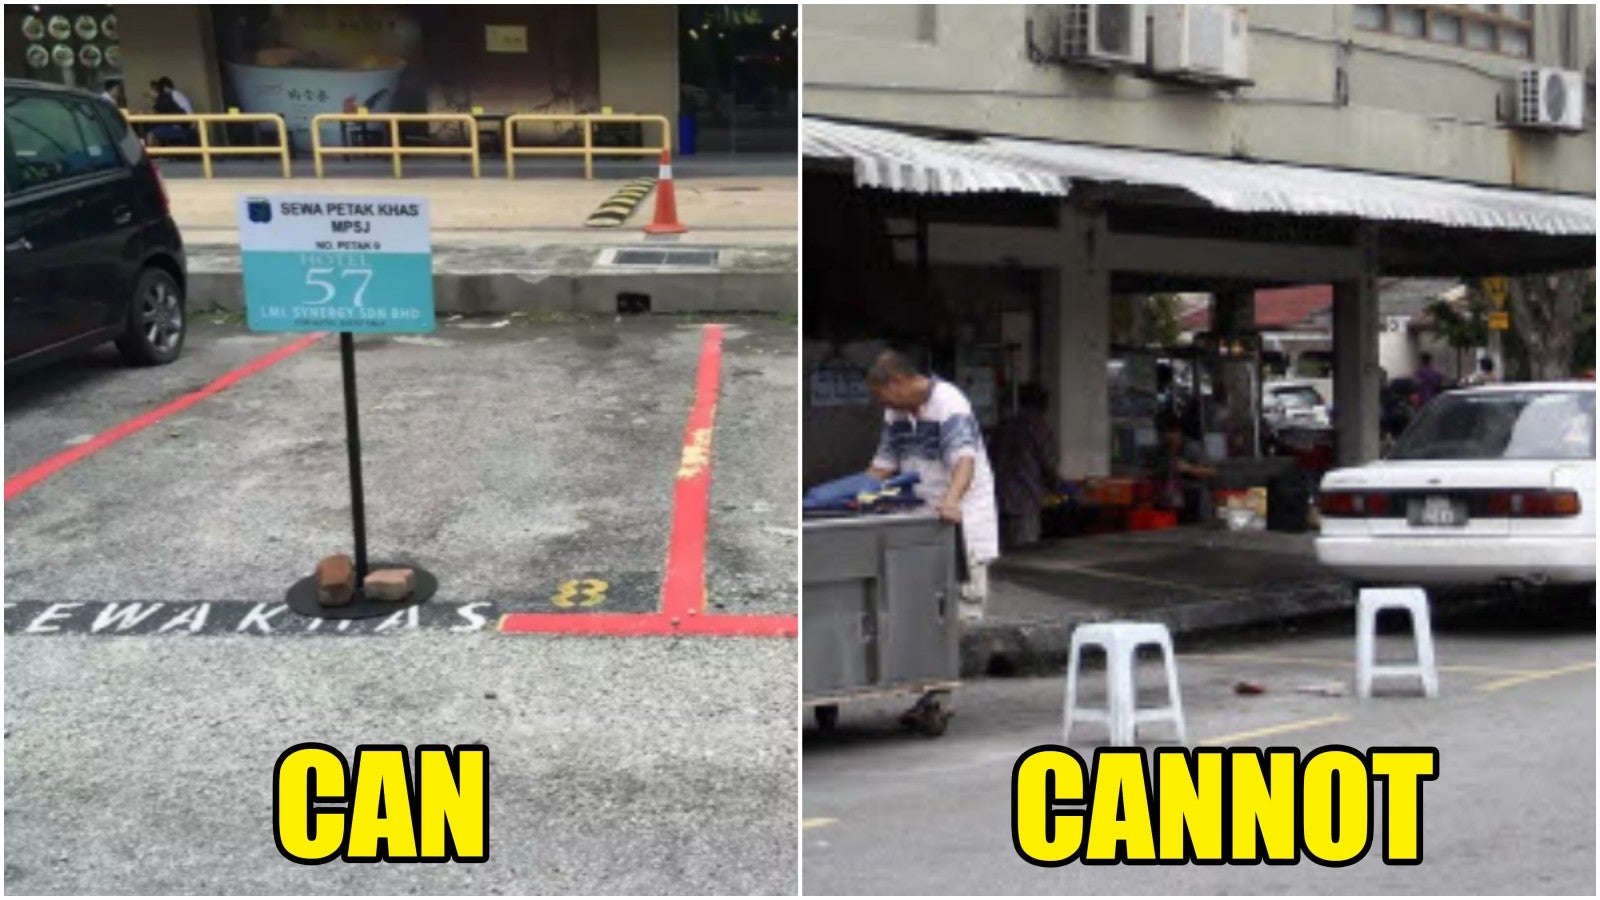 Is It Legal For Malaysian Shop Owners to Block Parking Spaces? - WORLD OF BUZZ 1